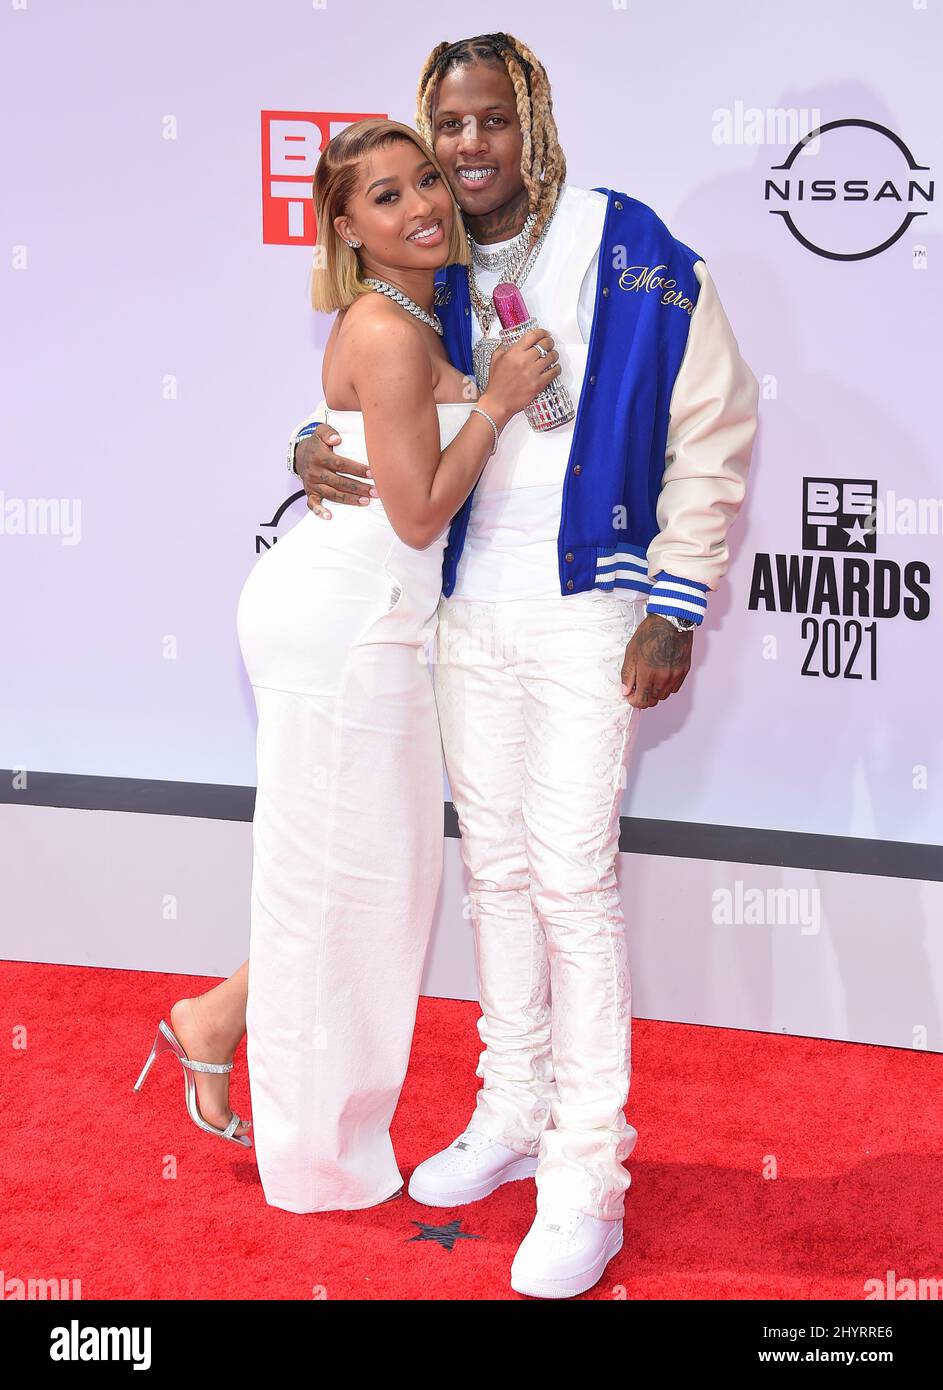 who is lil durk dating